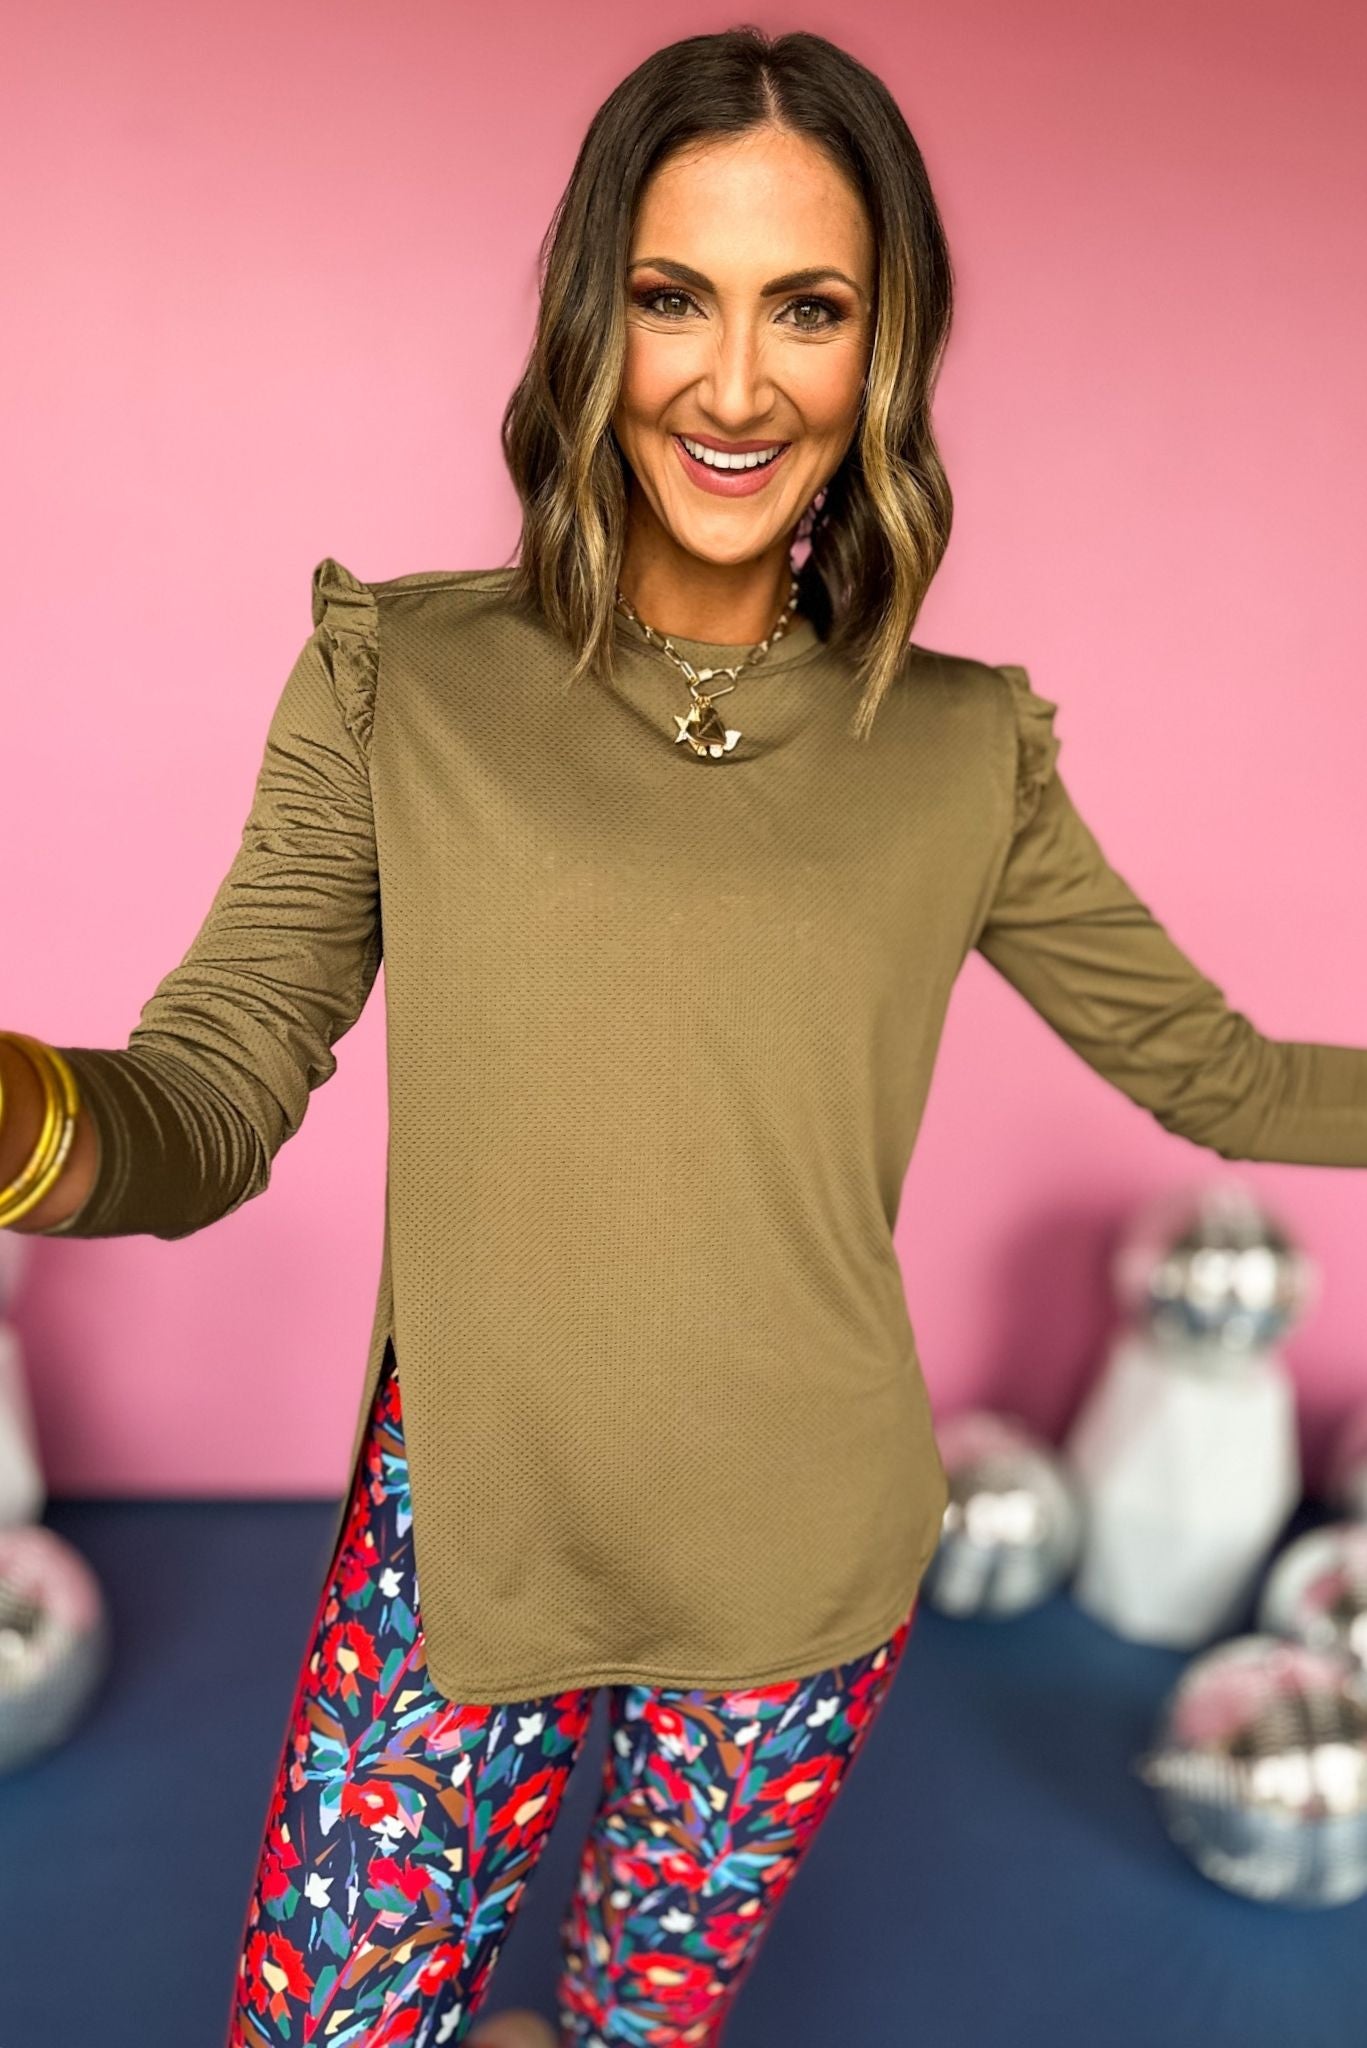 SSYS Olive Long Sleeve Ruffle Hem Active Top, must have top, must have athleisure, elevated style, elevated athleisure, mom style, active style, active wear, fall athleisure, fall style, comfortable style, elevated comfort, shop style your senses by mallory fitzsimmons